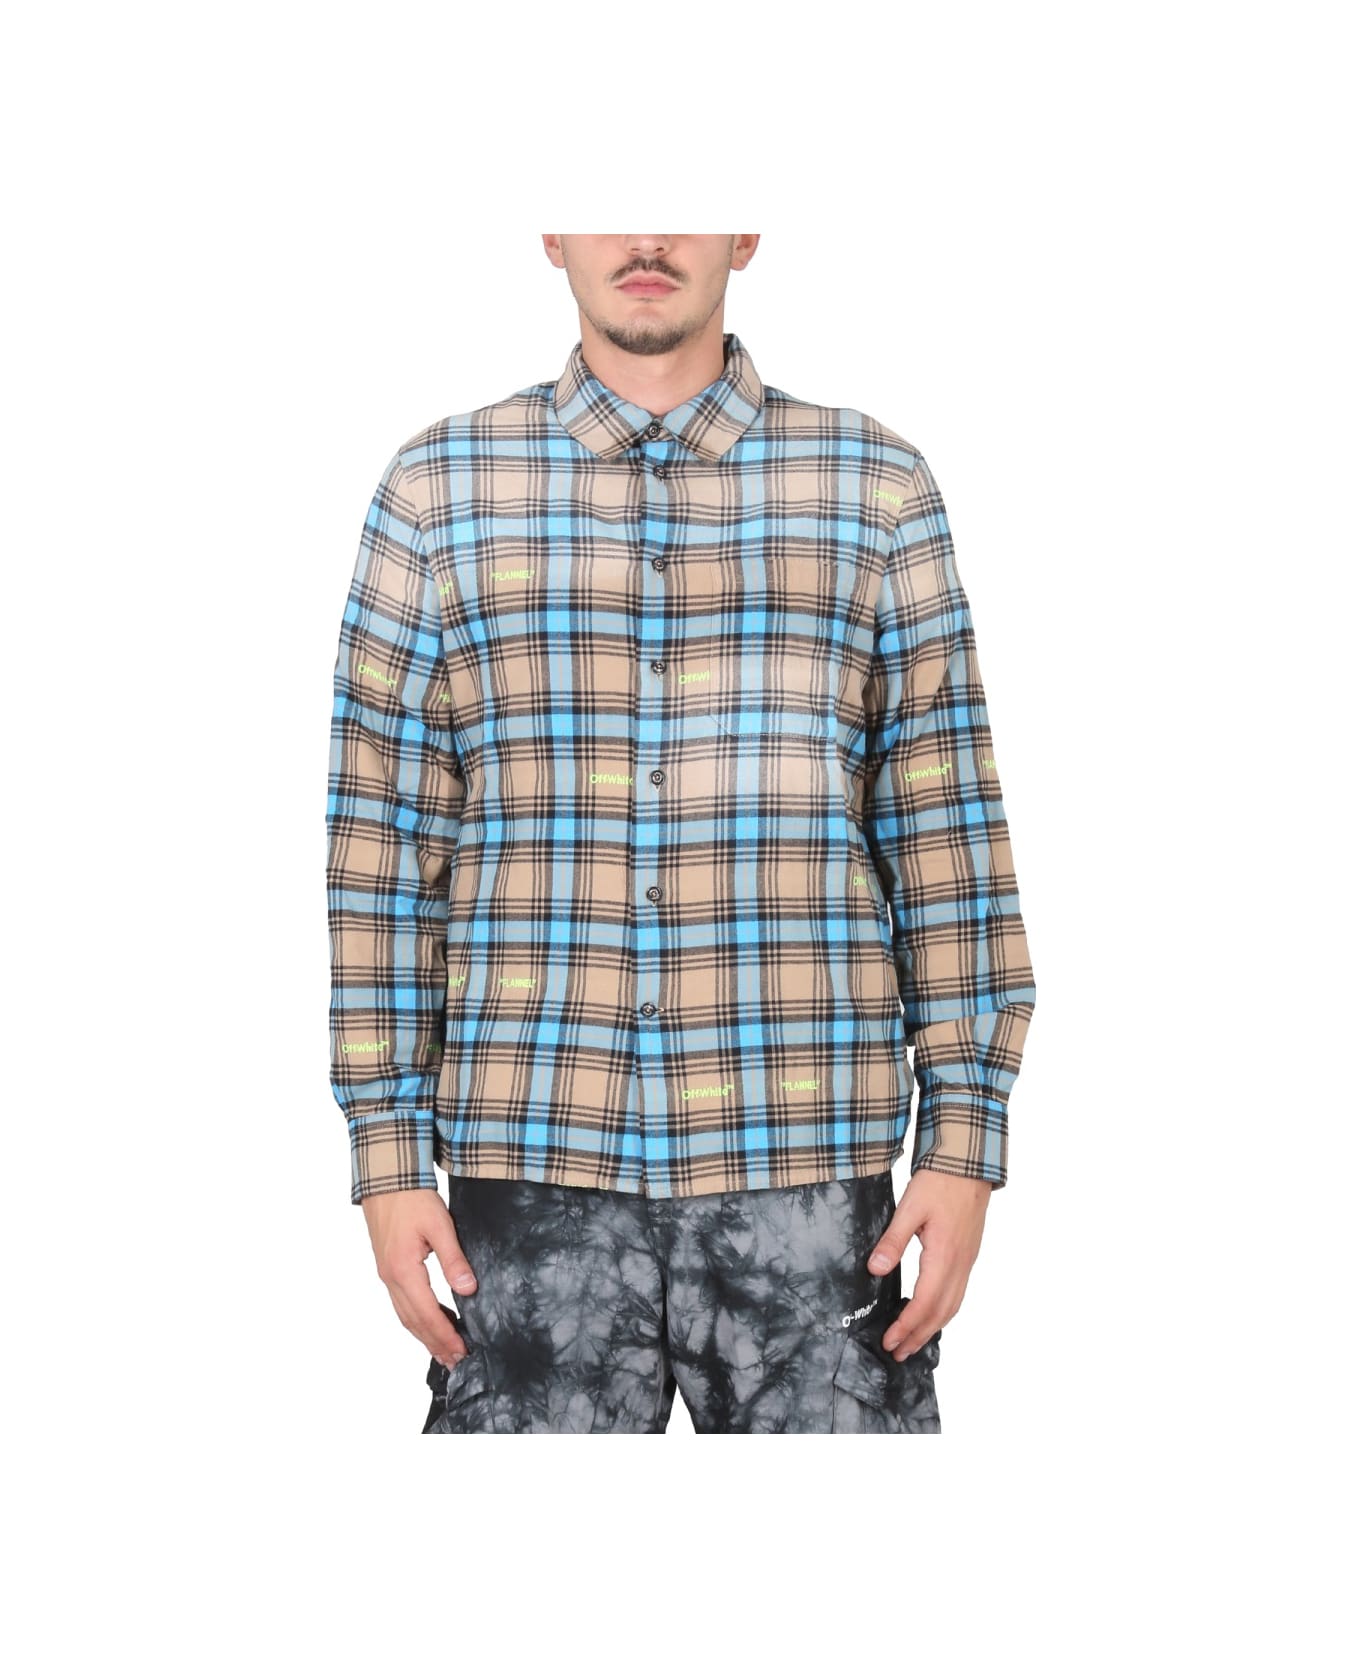 Off-White Shirt With Check Pattern - BEIGE シャツ